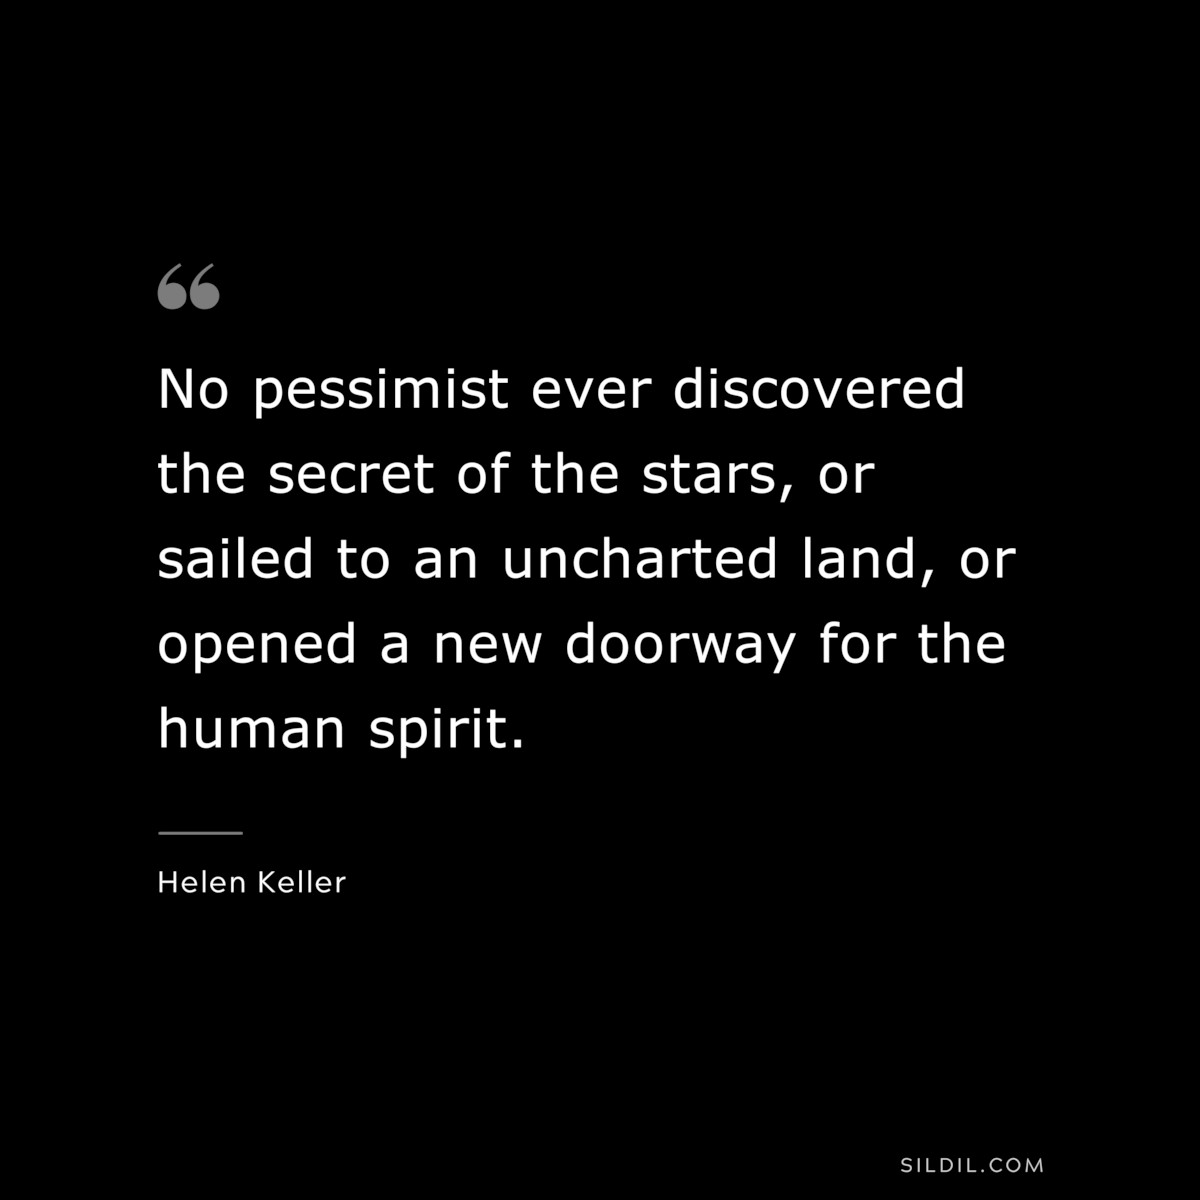 No pessimist ever discovered the secret of the stars, or sailed to an uncharted land, or opened a new doorway for the human spirit. ― Helen Keller